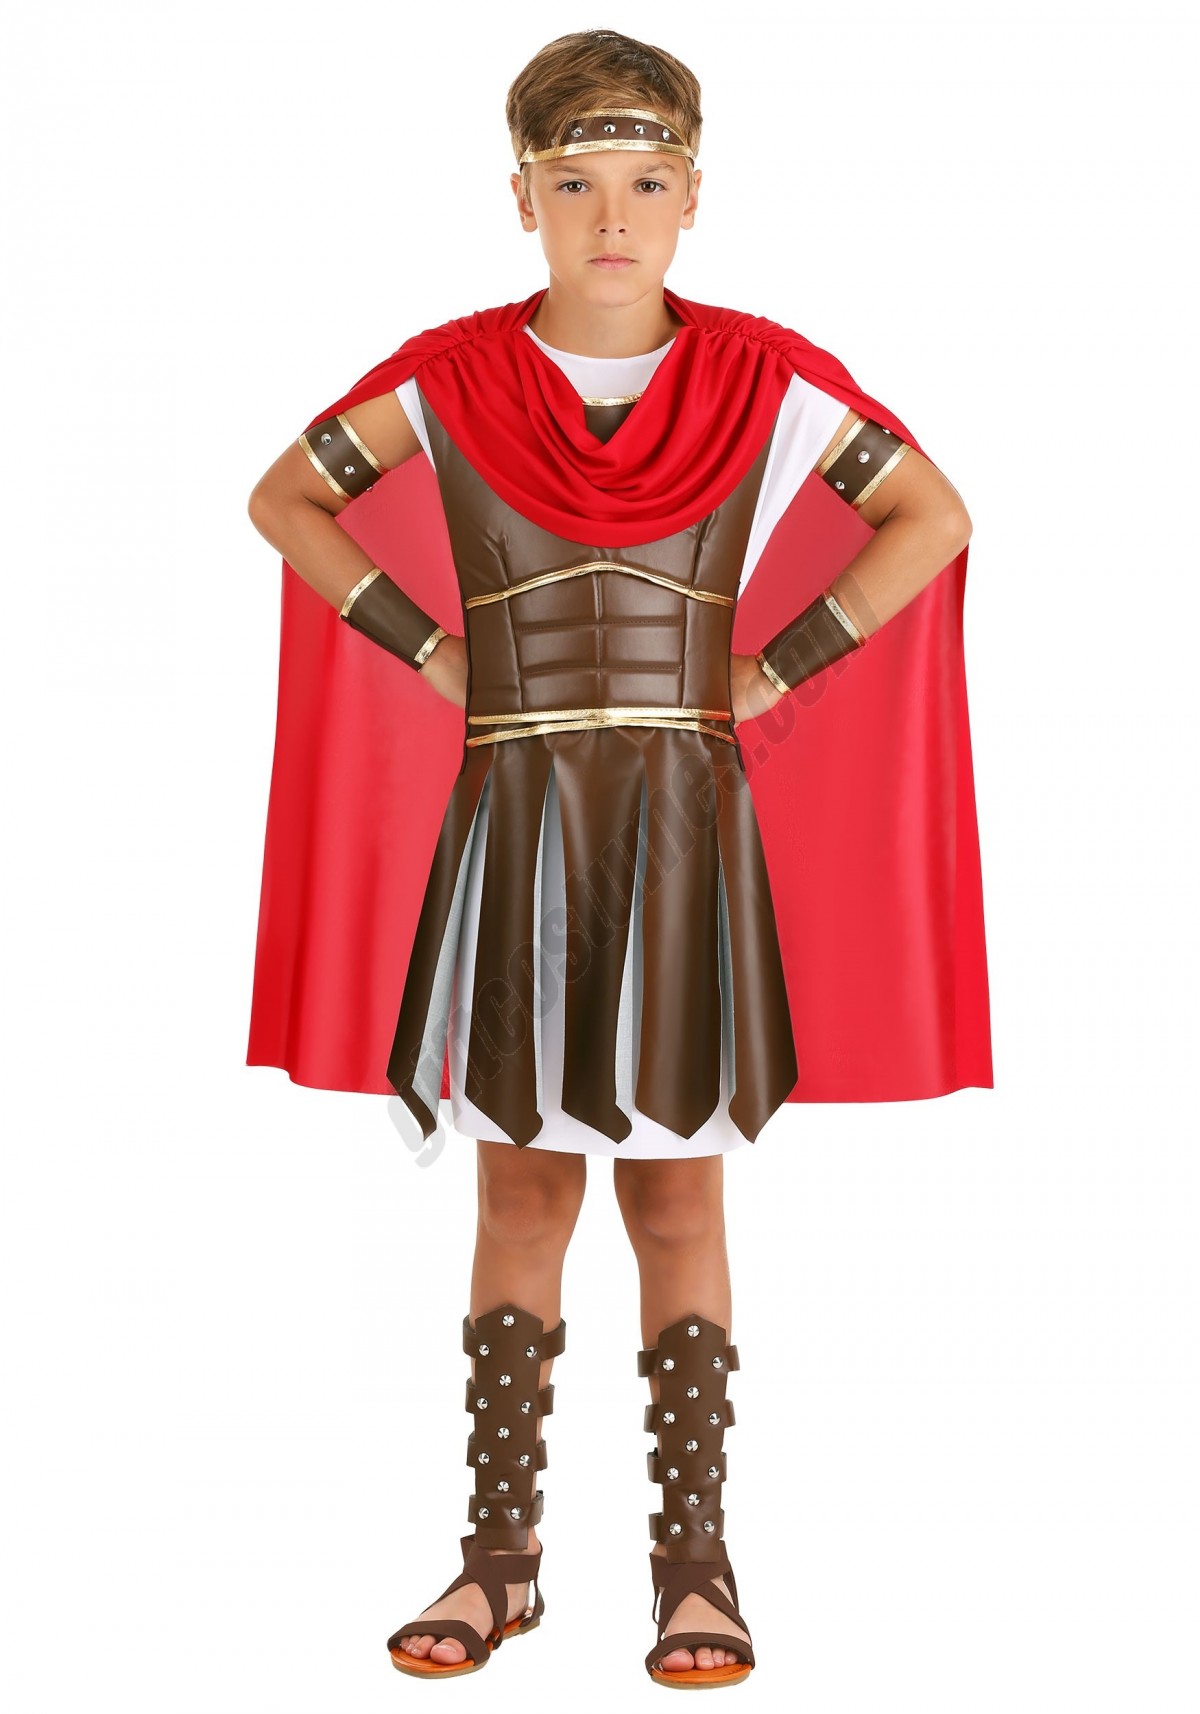 Hercules Costume for Boys Promotions - -2